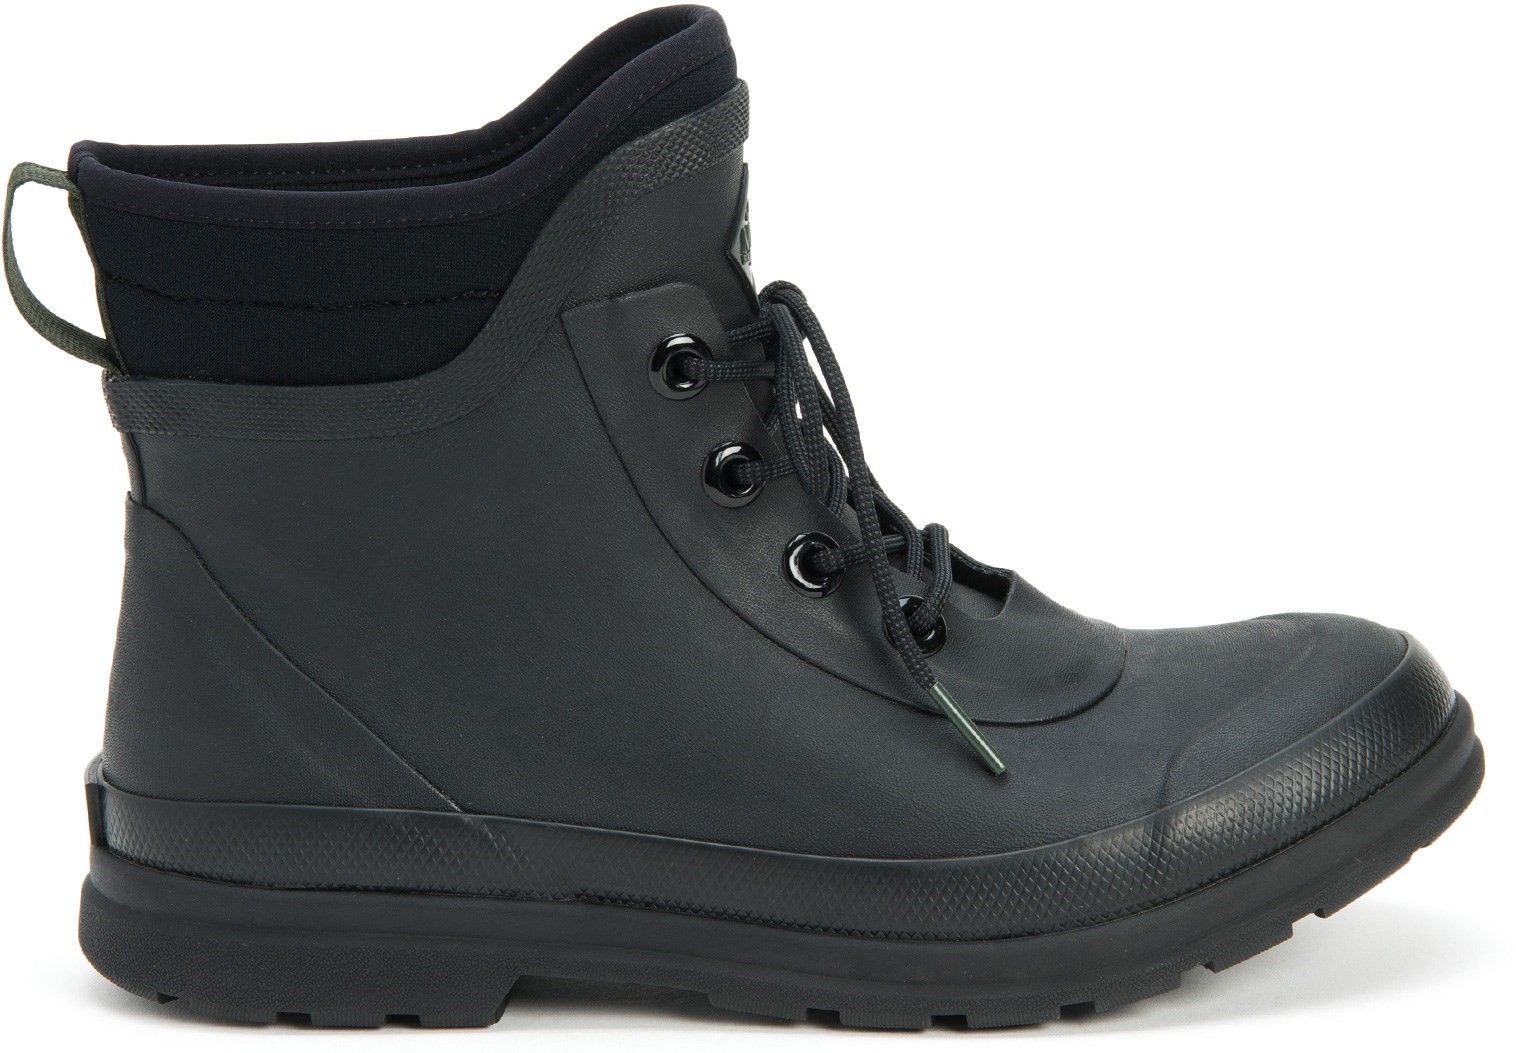 Originals Lace Up Boot by Muck Boots - Neoprene booties are wrapped in soft rubber for comfortable waterproof protection. Moulded PU footbeds with memory foam top covers offer maximum comfort and the antimicrobial insert topcover keeps you fresh100% Waterproof. 
Full Neoprene Bootie exposed at collar for added comfort. 
Moulded PU insert with memory foam for superior underfoot comfort. 
Antimicrobial insert topcover for odour and moisture management. 
Easy on/off design.